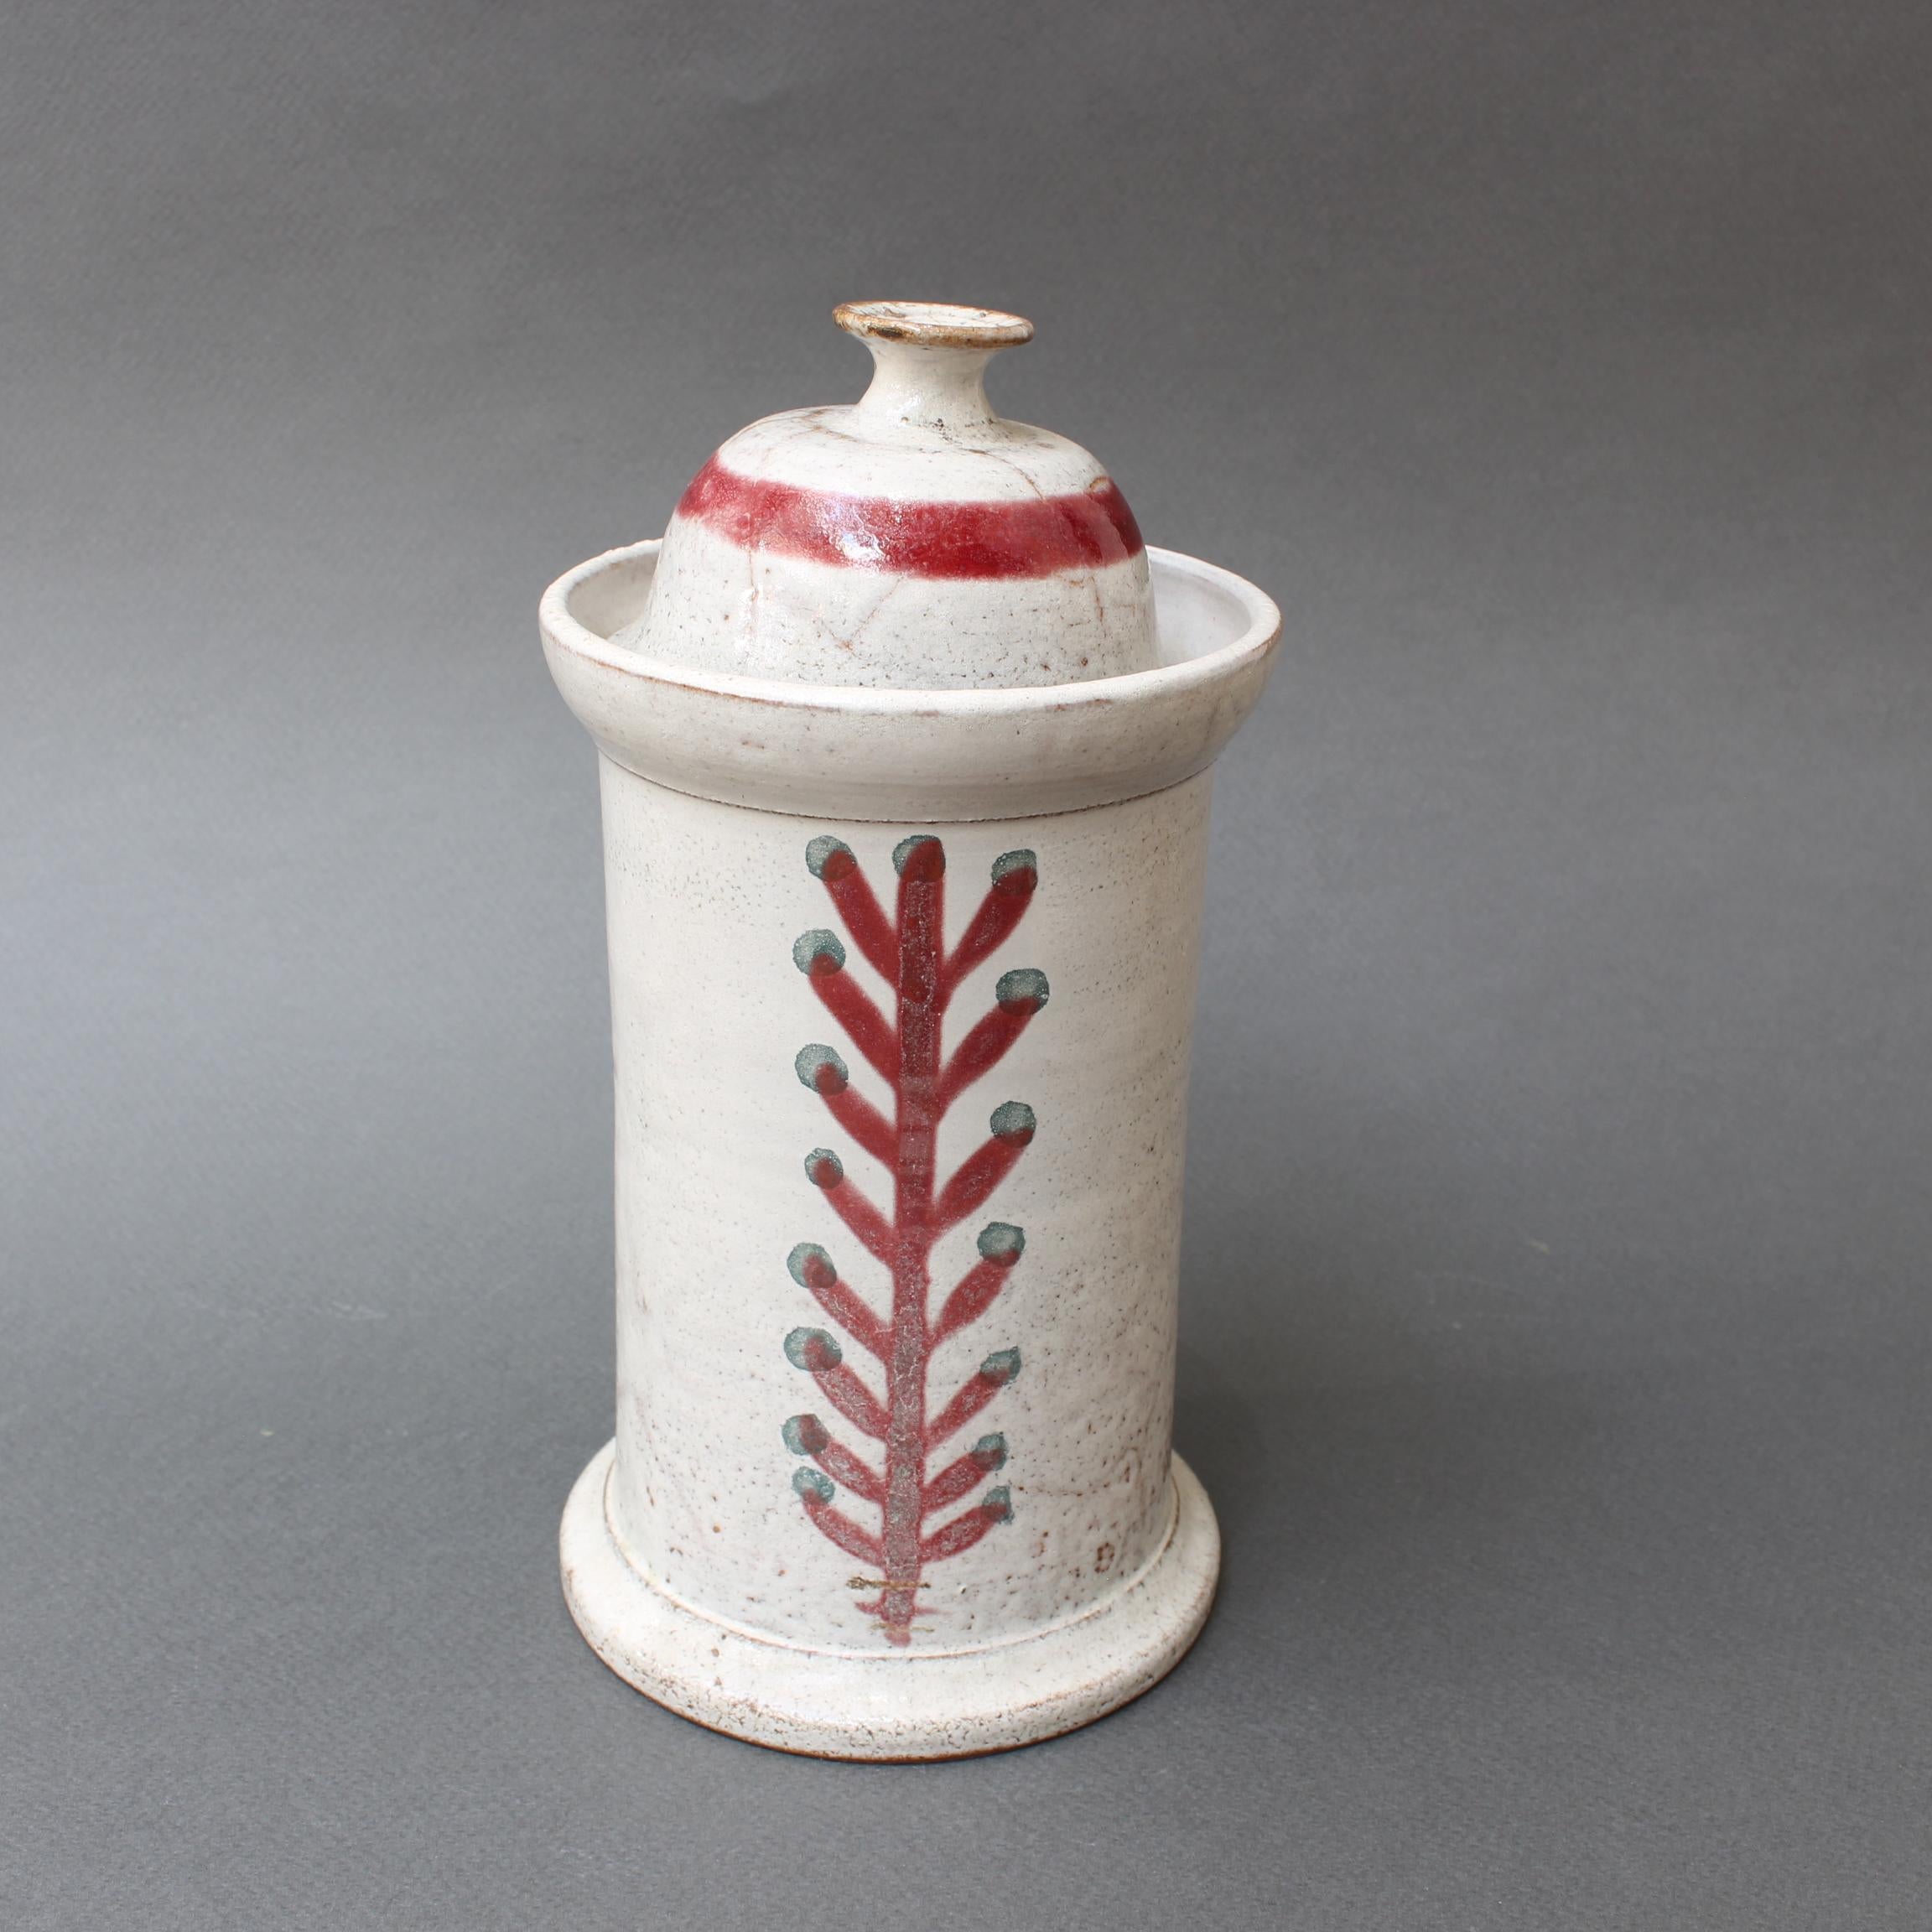 20th Century Midcentury French Ceramic Apothecary Jar by Gustave Reynaud, Le Murier